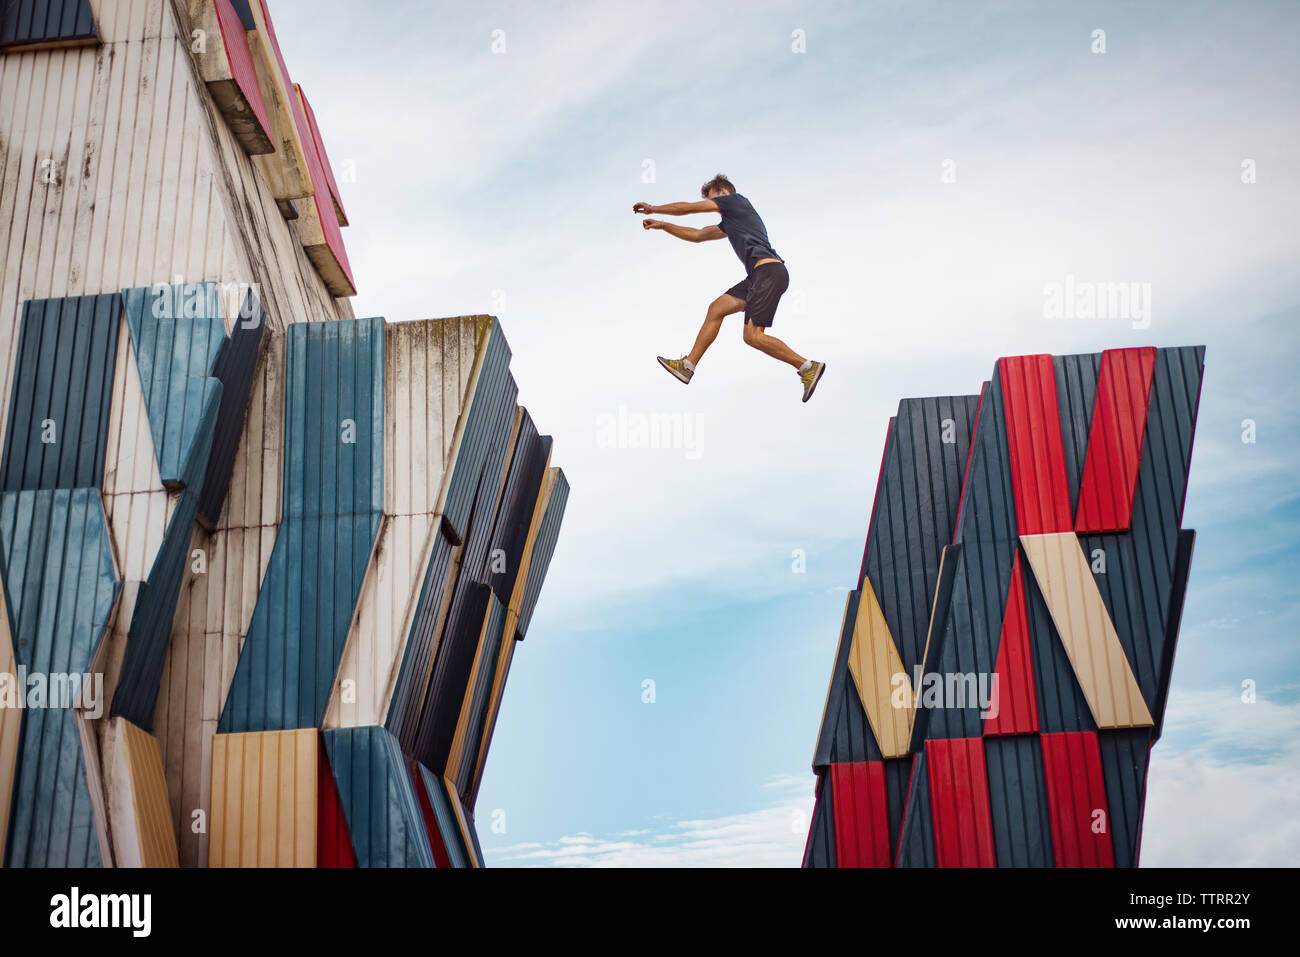 Low angle view of man jumping over buildings against sky Stock Photo